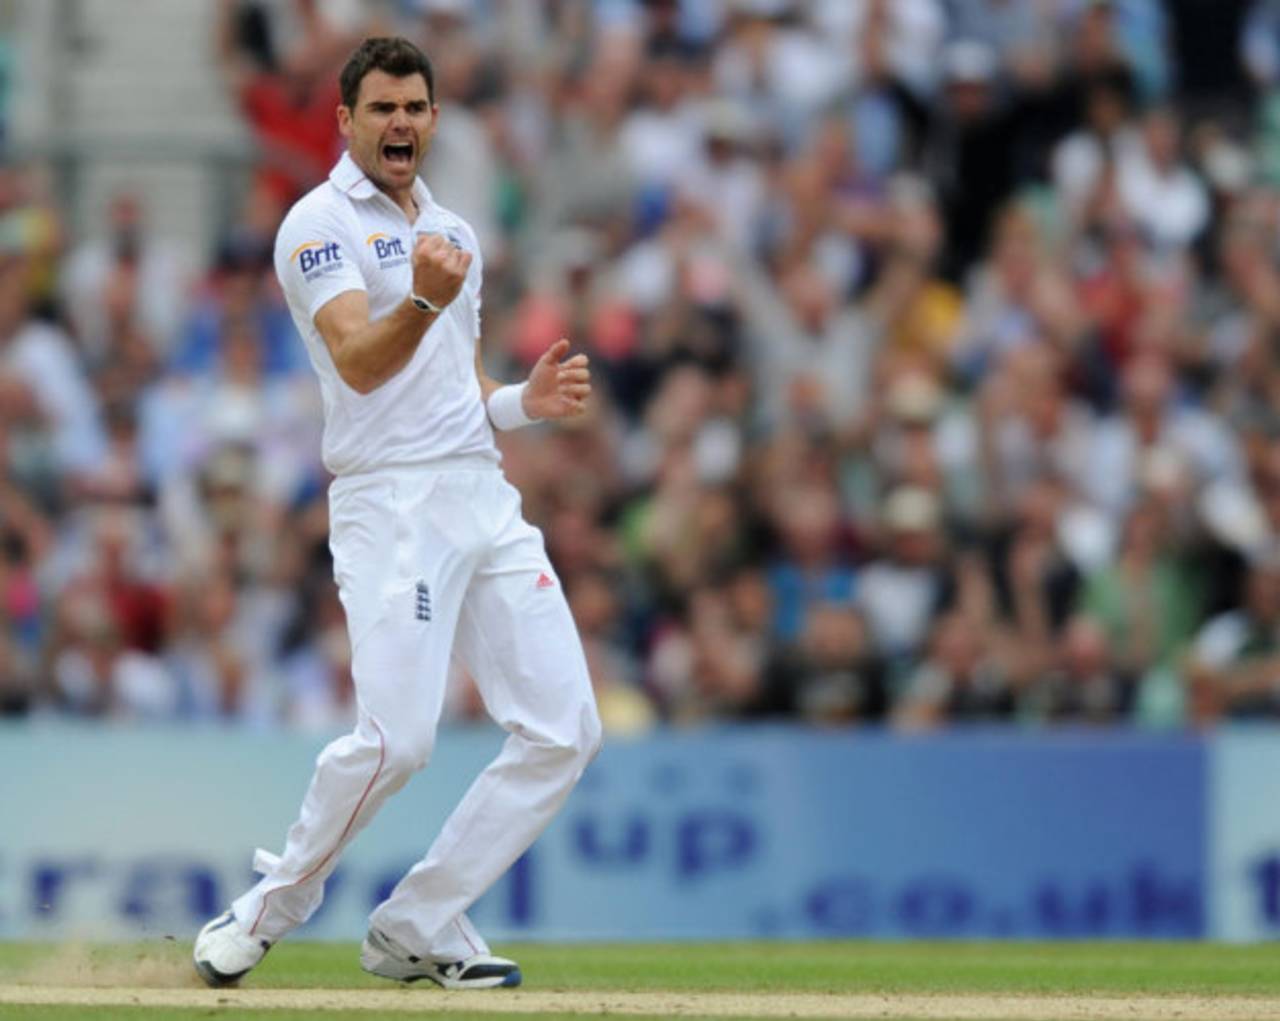 James Anderson got the early wicket of Alviro Petersen, England v South Africa, 1st Investec Test, The Oval,  2nd day, July 20, 2012